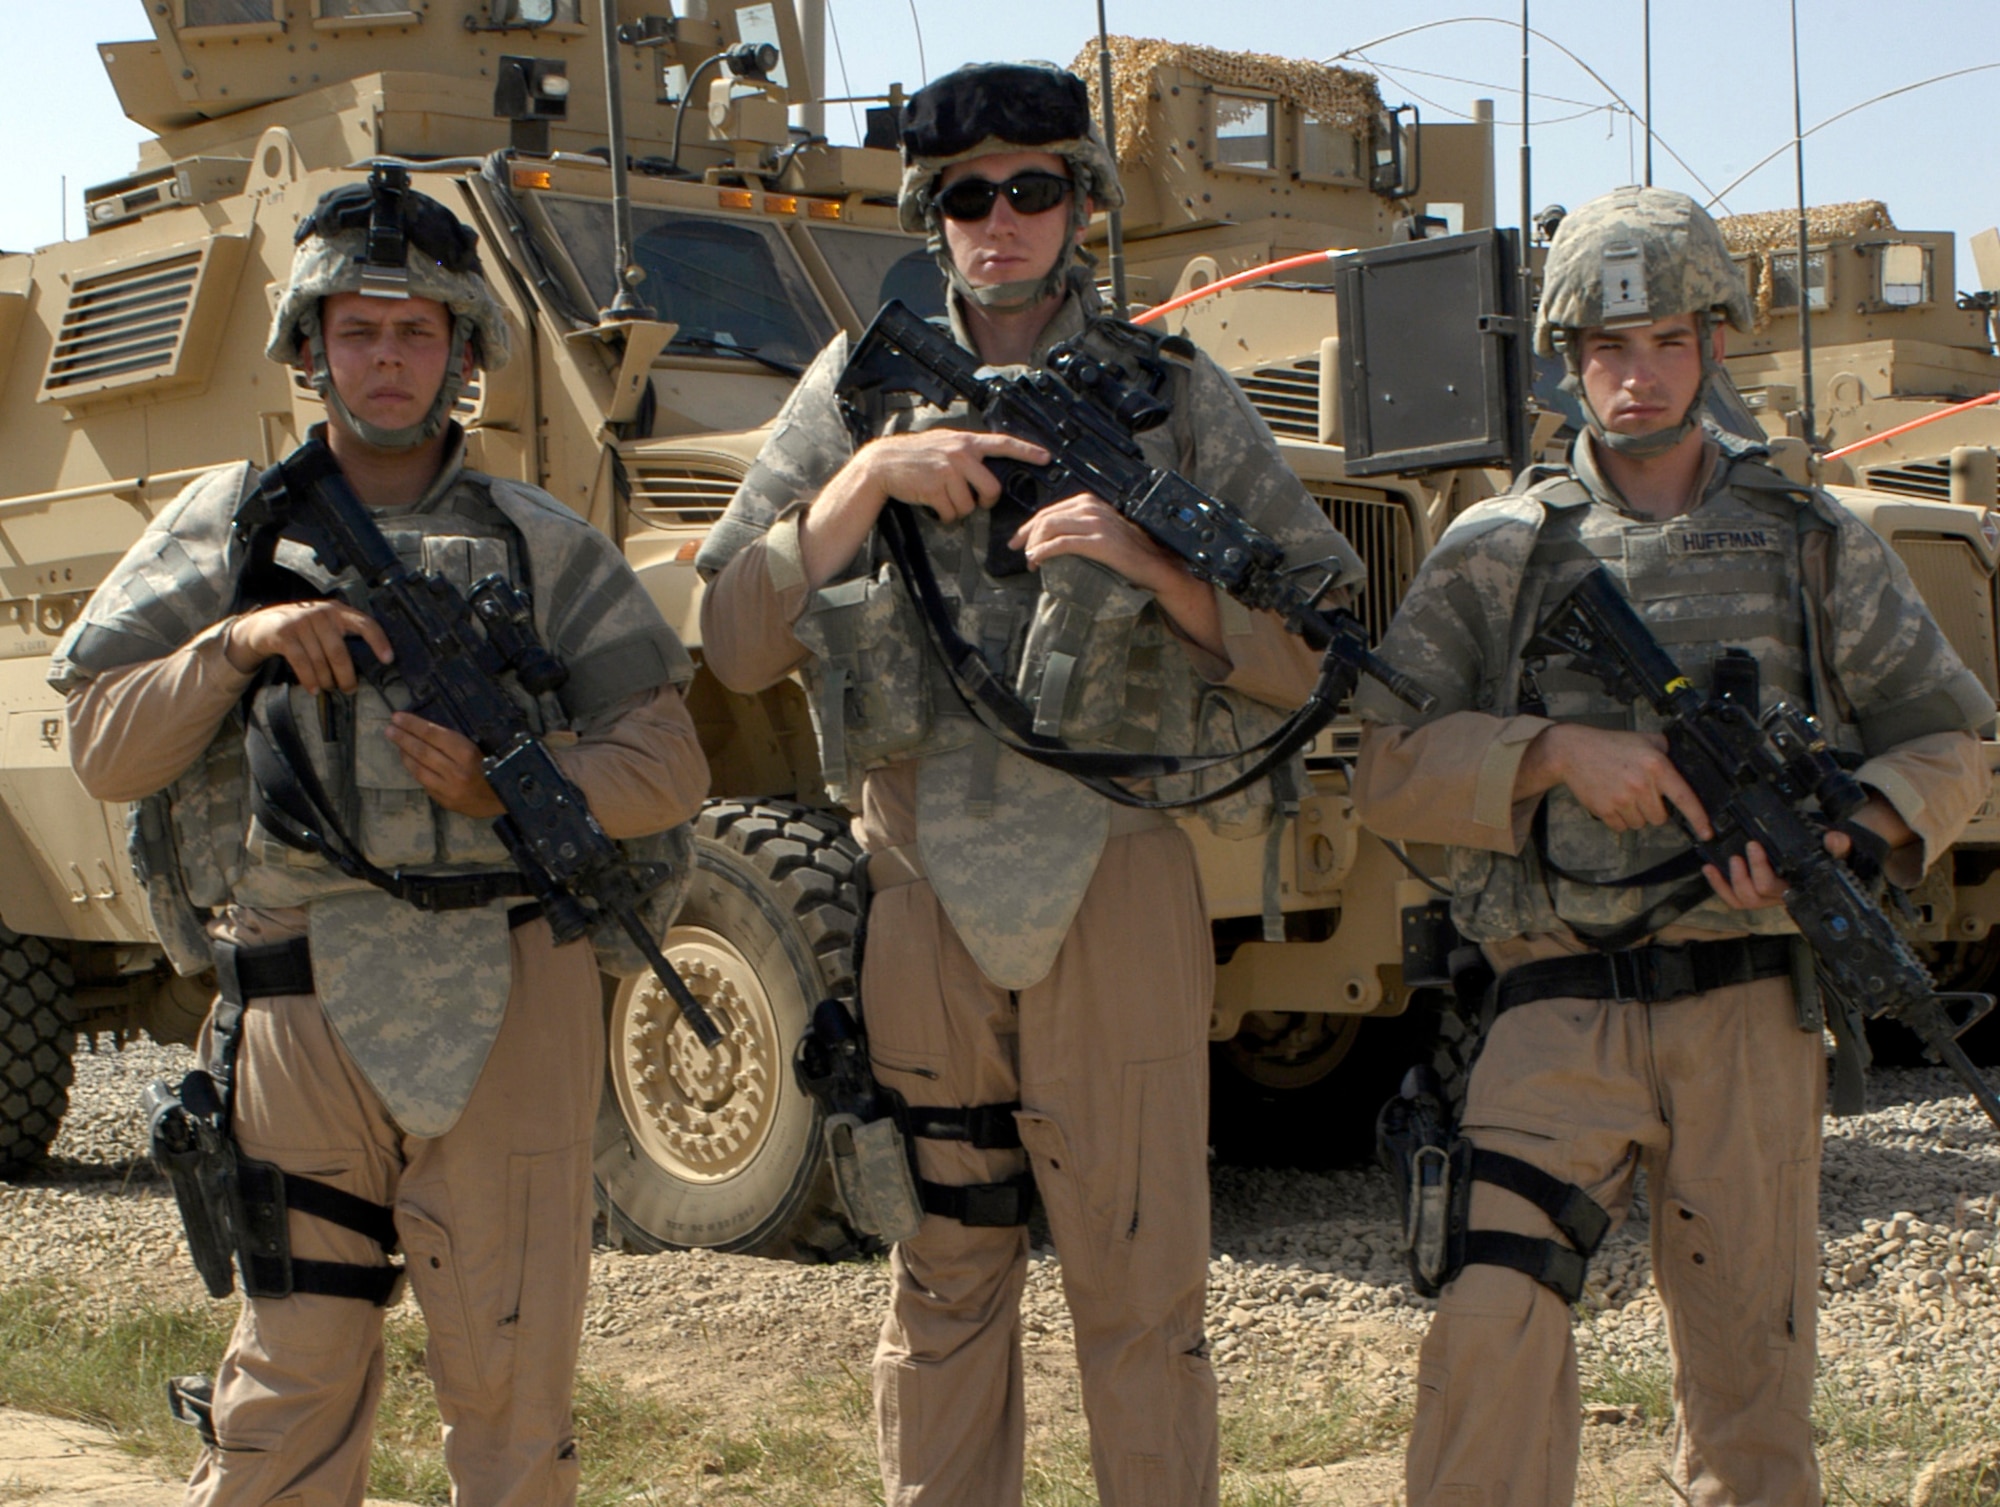 081007-F-2679L-185 
Airmen 1st Class Eric Babcock, Stephen Ellis and Andrew Huffman stand in front of several Mine Resistant Ambush Protected, or MRAP, vehicles Oct. 7 at Joint Base Balad, Iraq. The Airmen are deployed to the 532nd Expeditionary Security Forces Squadron's Quick Response Force from the 99th Security Forces Squadron at Nellis Air Force Base, Nev. The QRF Airmen will use MRAPs as part of their mission to defend the base both inside and outside the perimeter, a mission not conducted by the Air Force since the Vietnam War.  (U.S. Air Force photo/Tech. Sgt. Craig Lifton) 